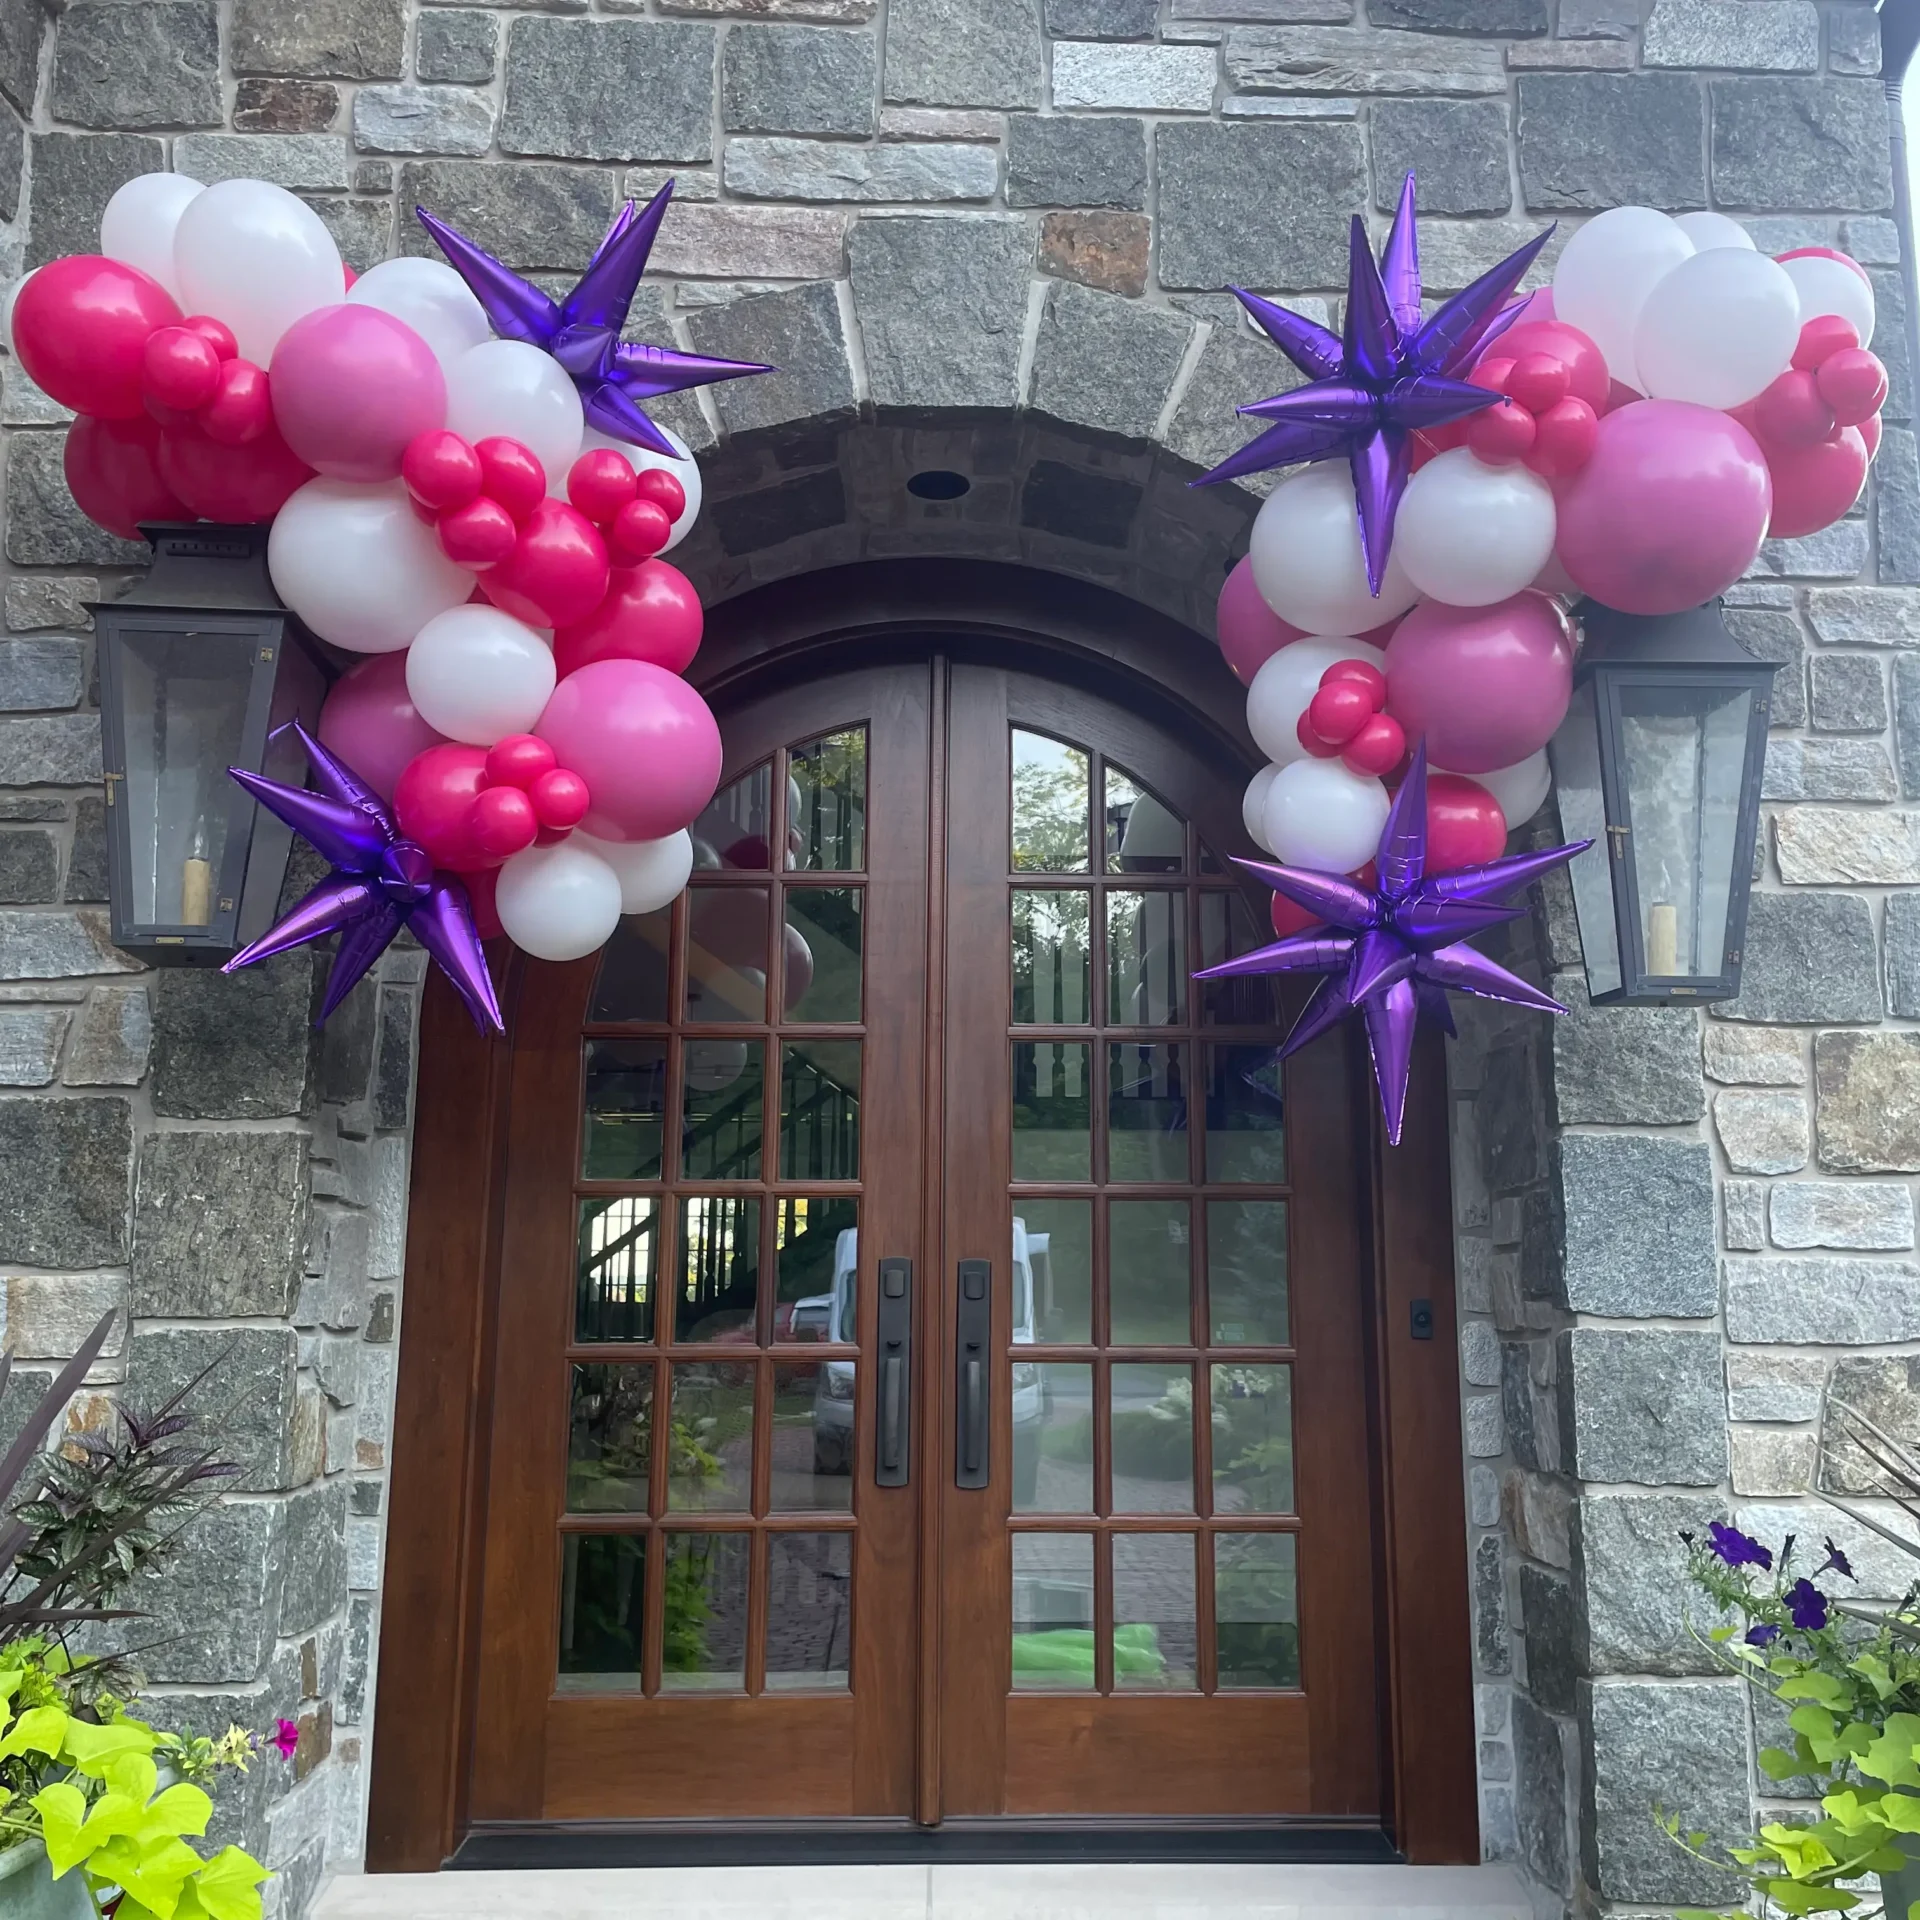 DIY Balloon Decorations | Balloon Business Resources